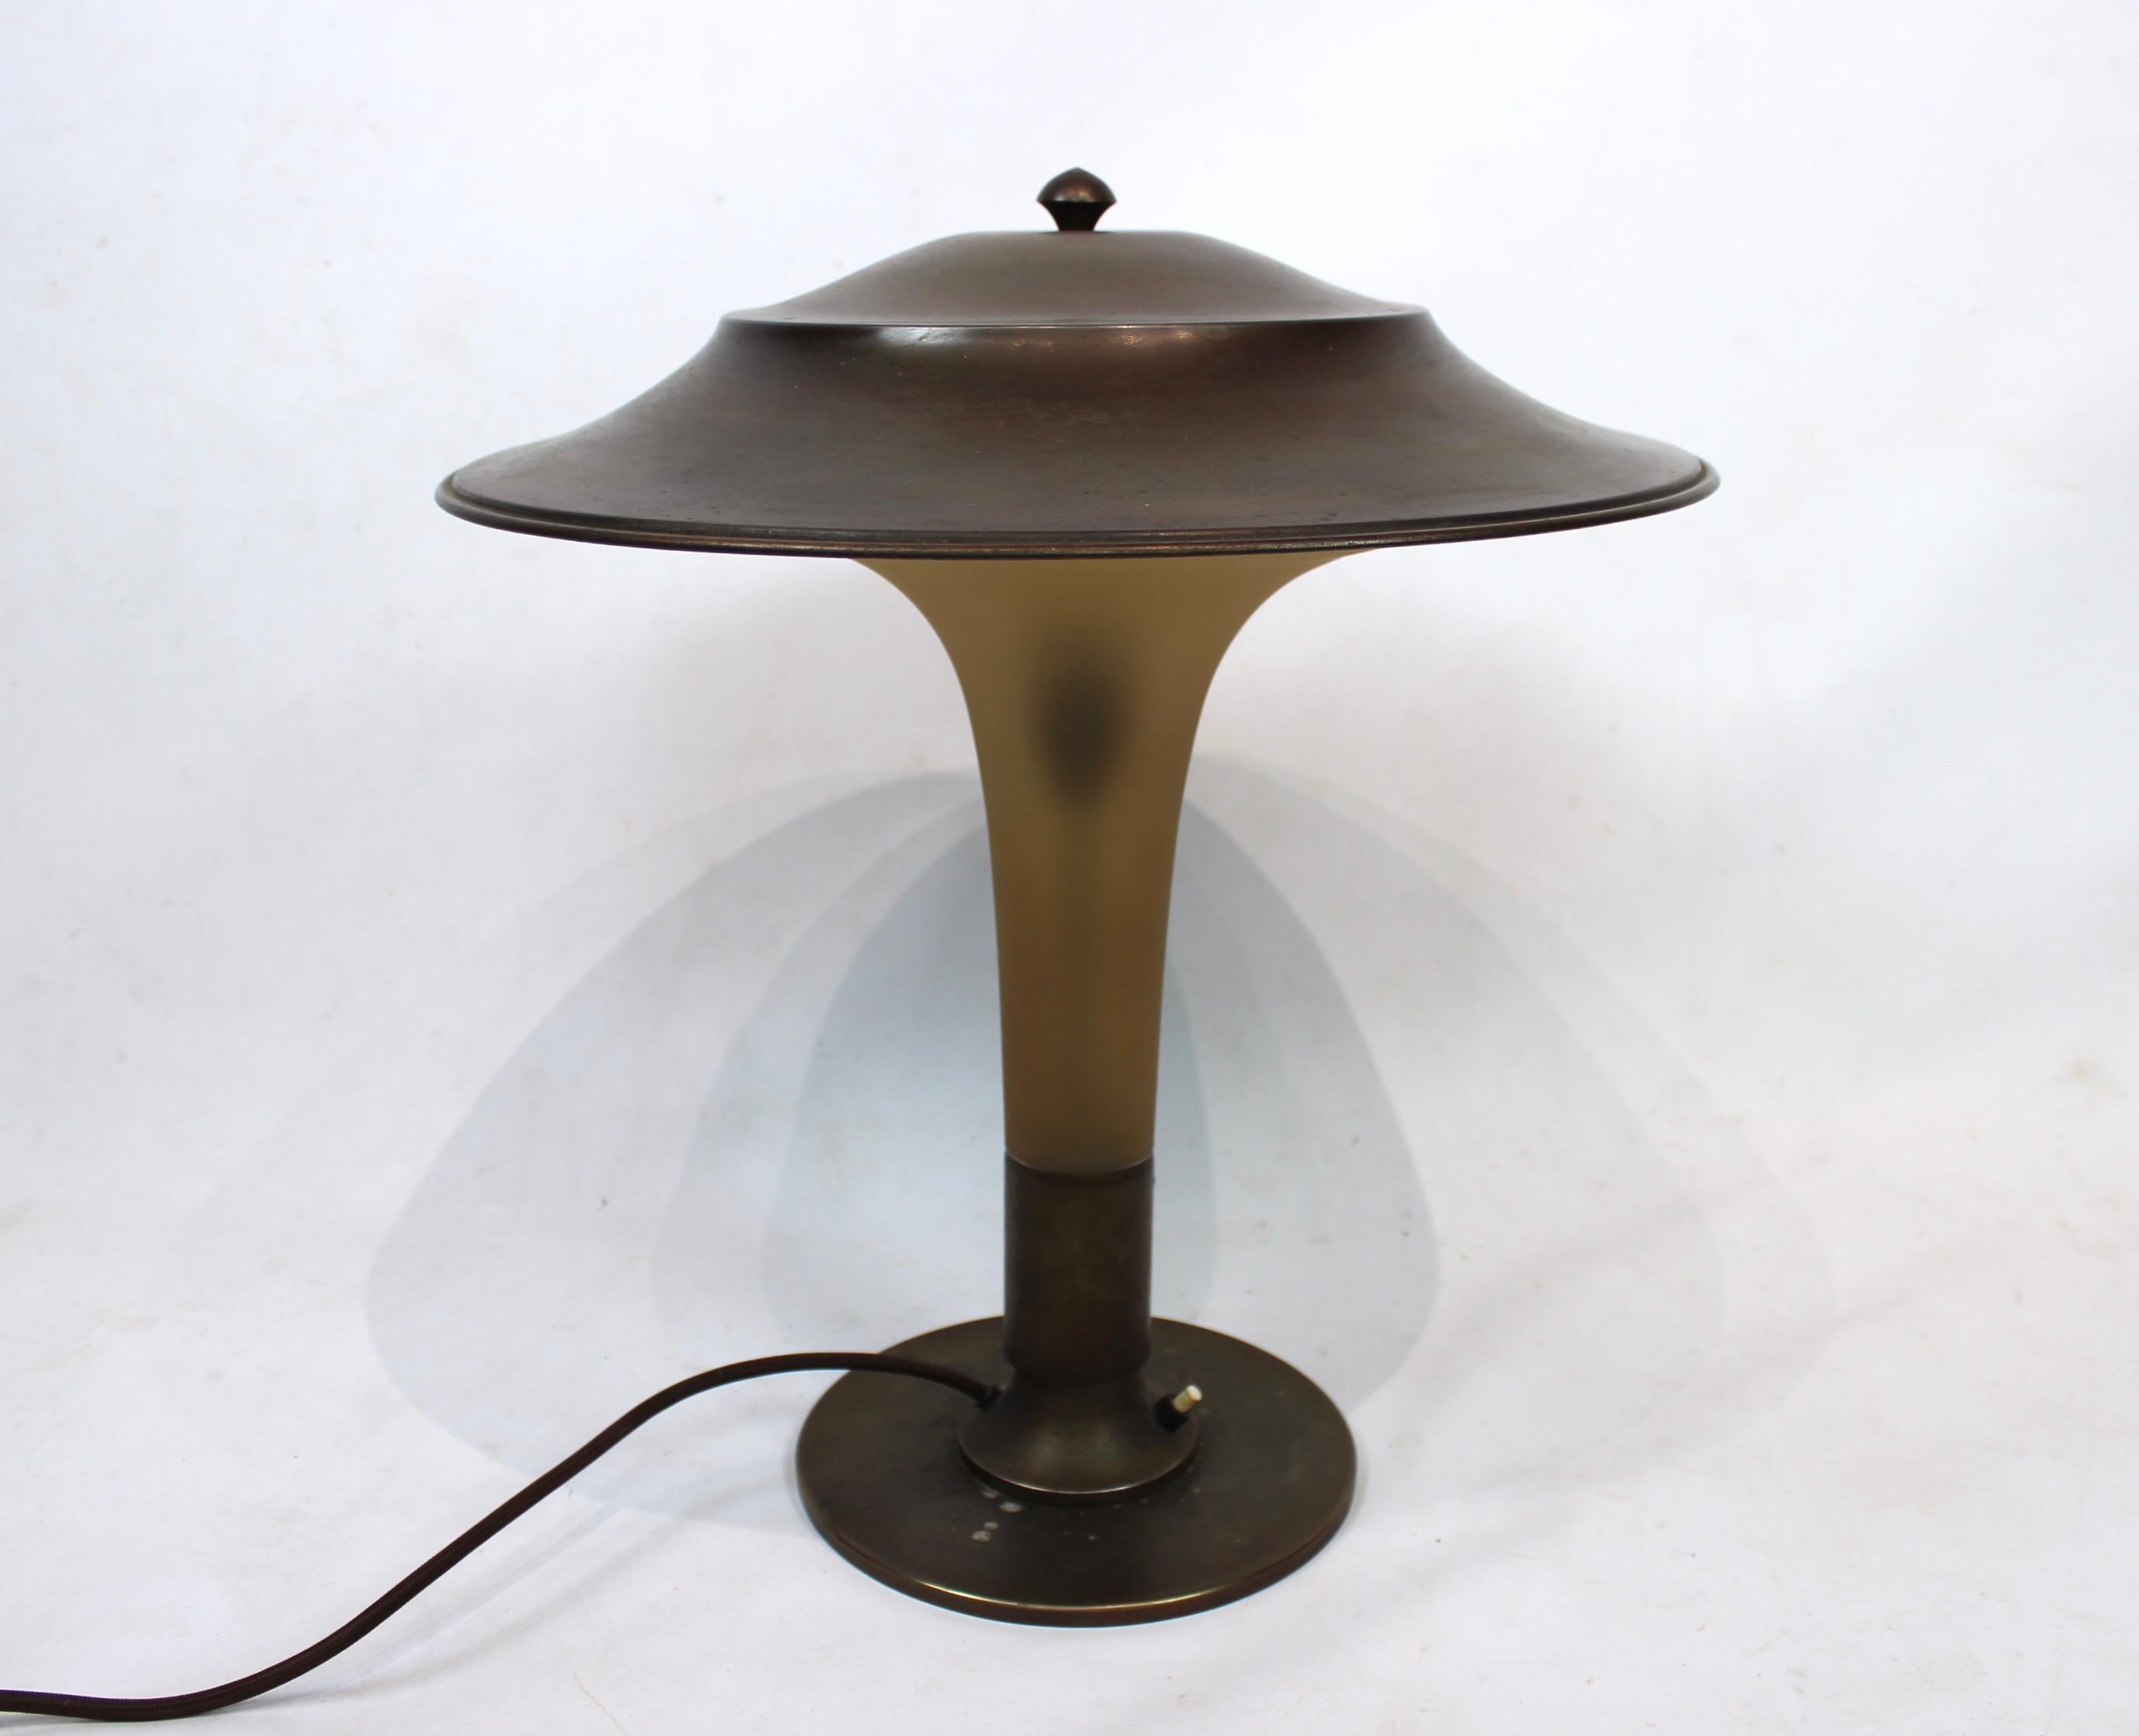 The Torch lamp with stem of amber colored glass and foot and shade of patinated brass. The lamp is by Fog and Mørup from the 1930s.